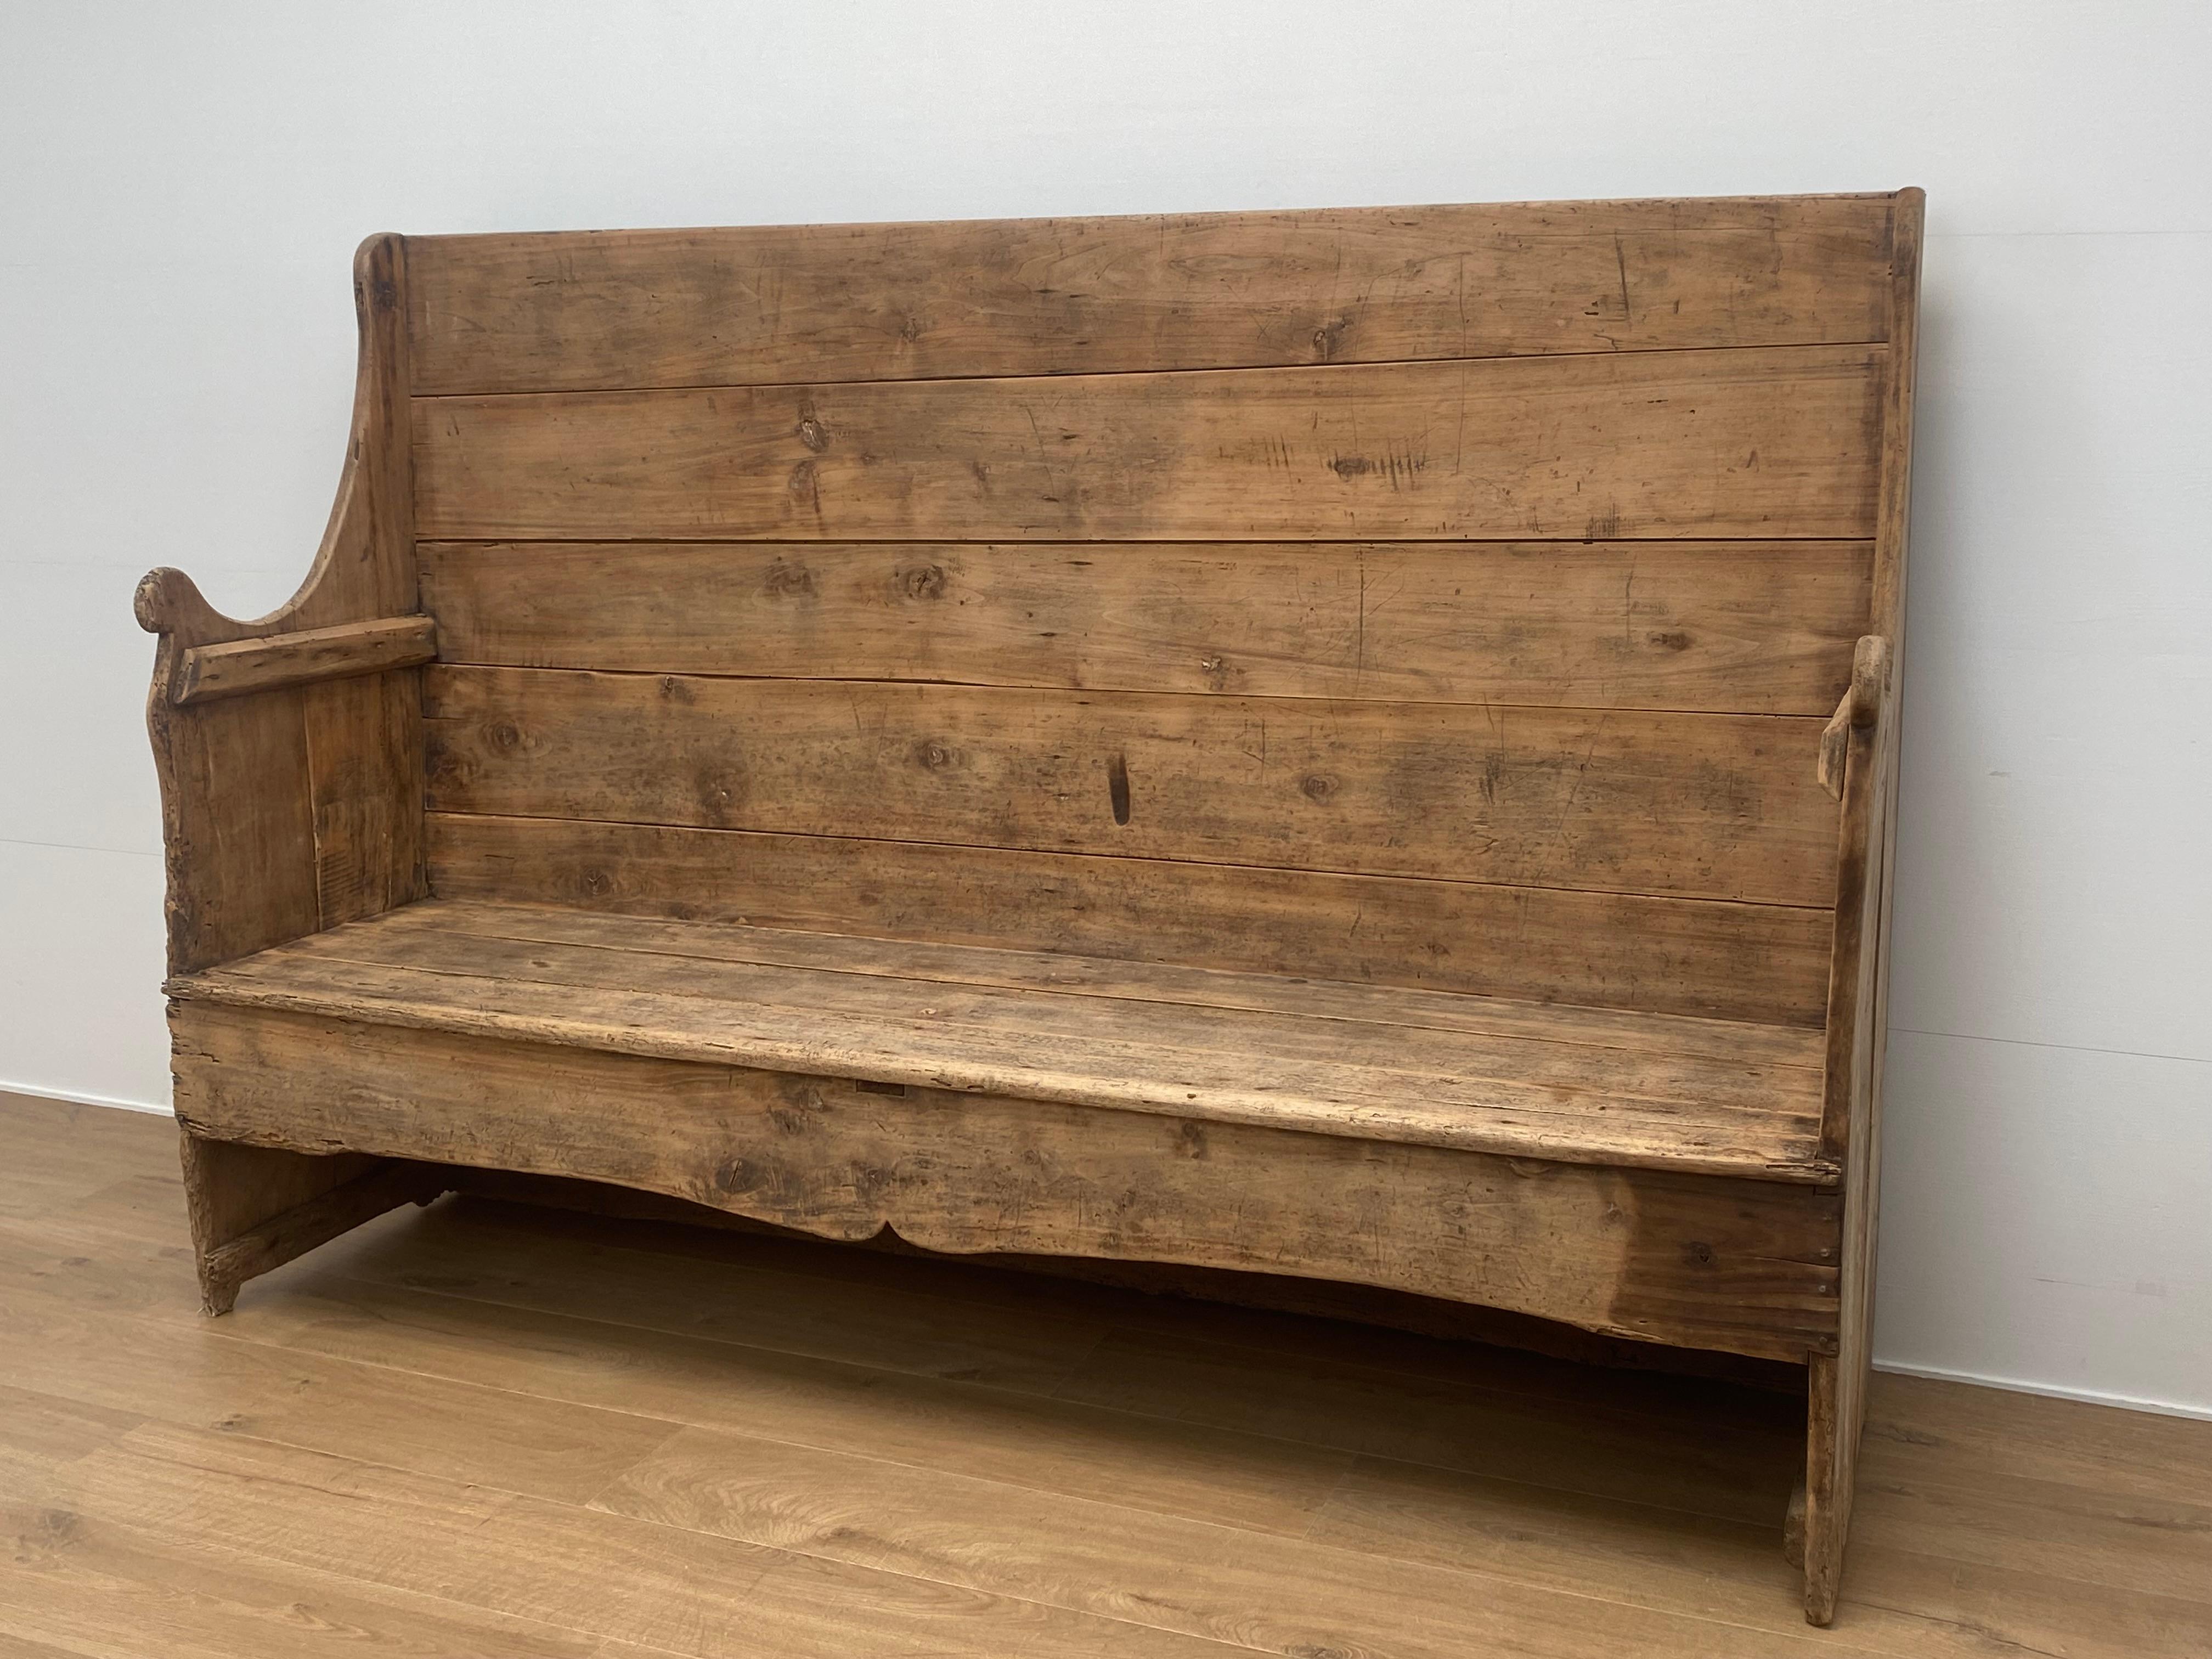 An elegant,Brutalist Spanish bench from the Catalan Region,from around 1890,
the bench has a good, old patina and shine of the Bleached Chestnut,
the bench is fully restored,
to be used for different purposes, kitchen , entrance hall etc